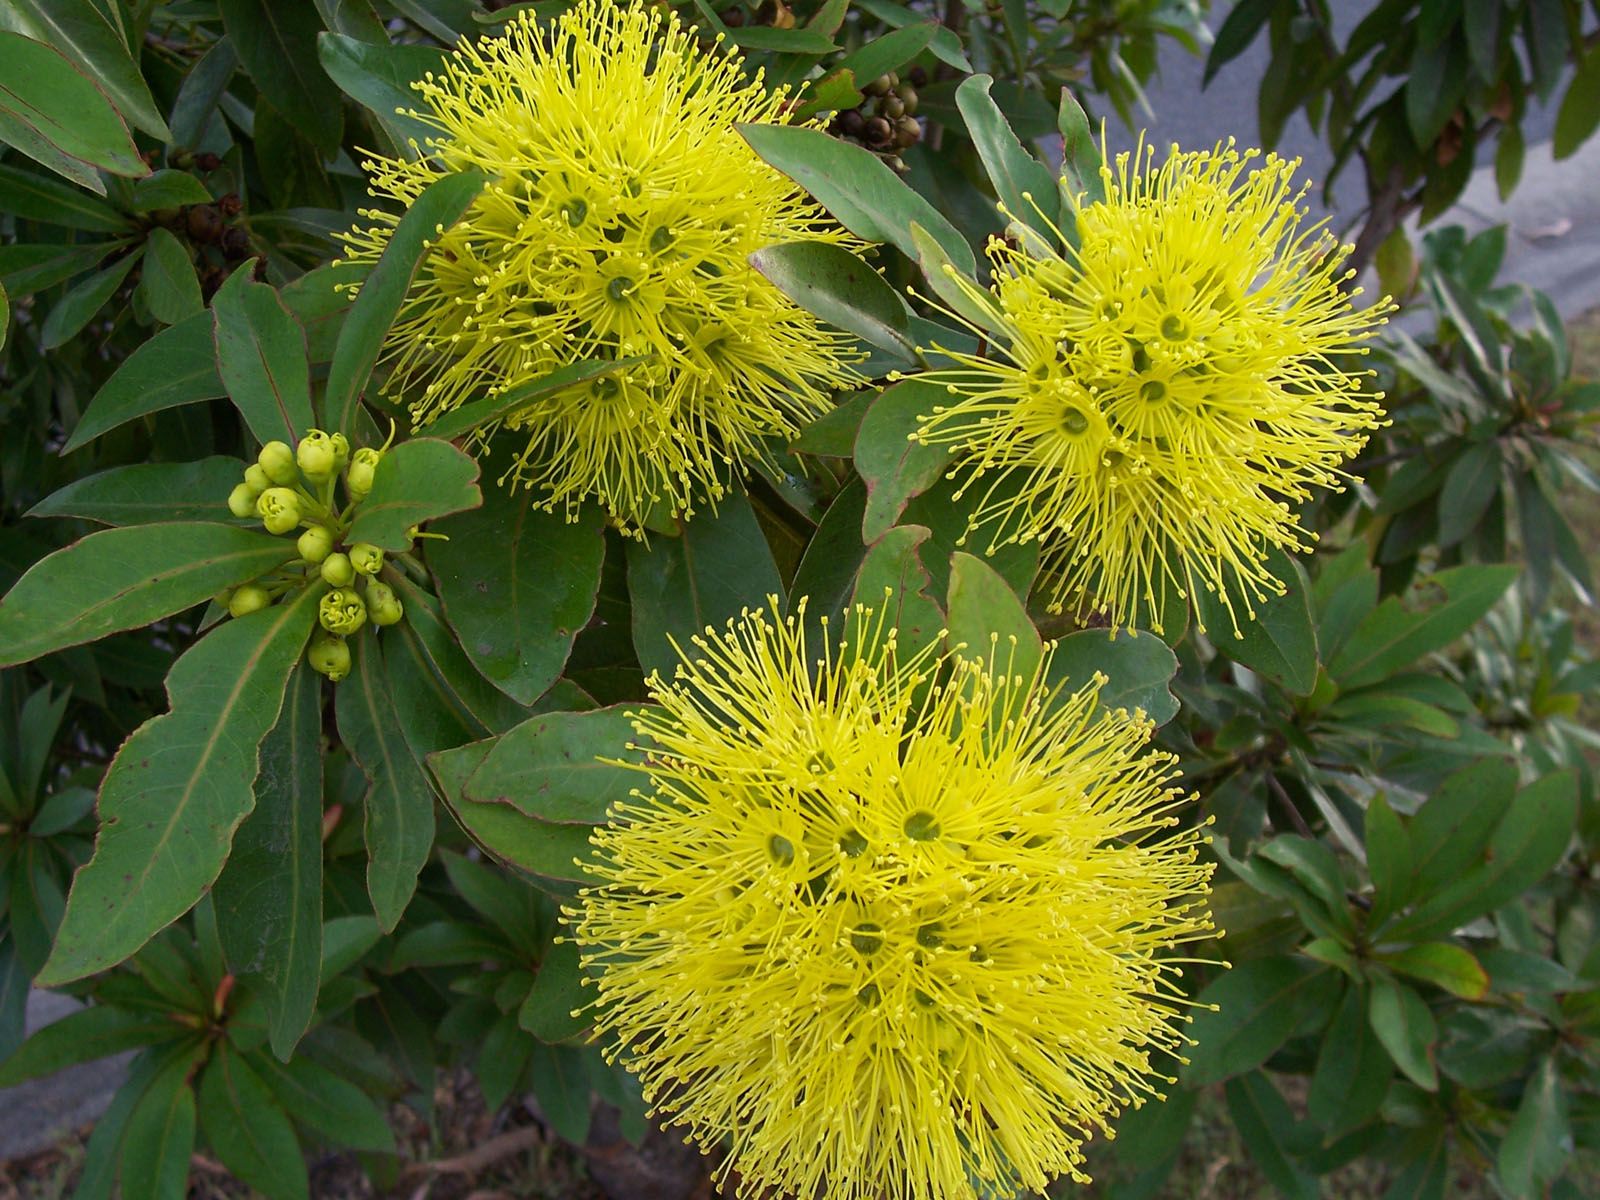 Golden Penda (Xanthostemon chrysanthus) is a species of trees found ...